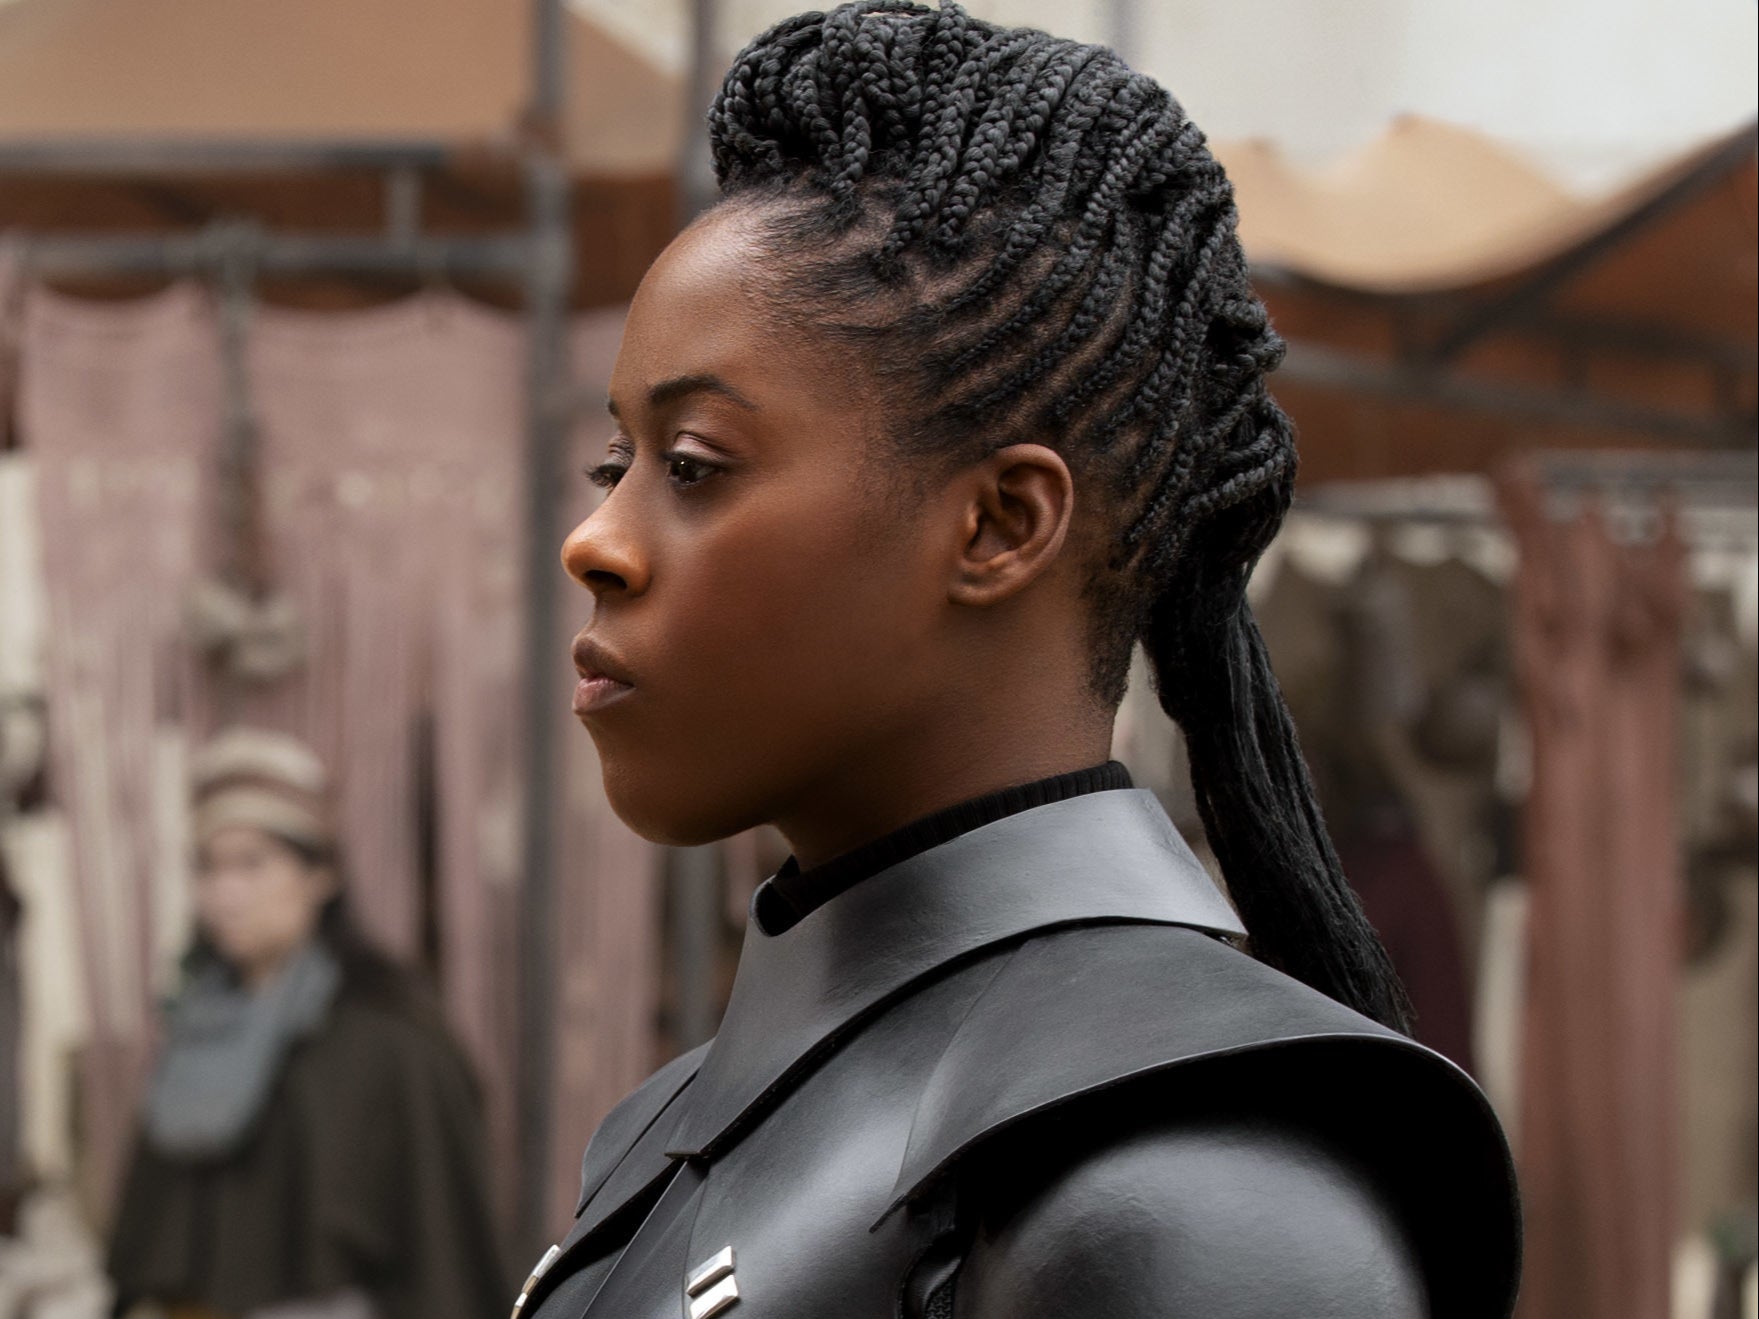 Moses Ingram: Queen's Gambit star on her new role in Star Wars series